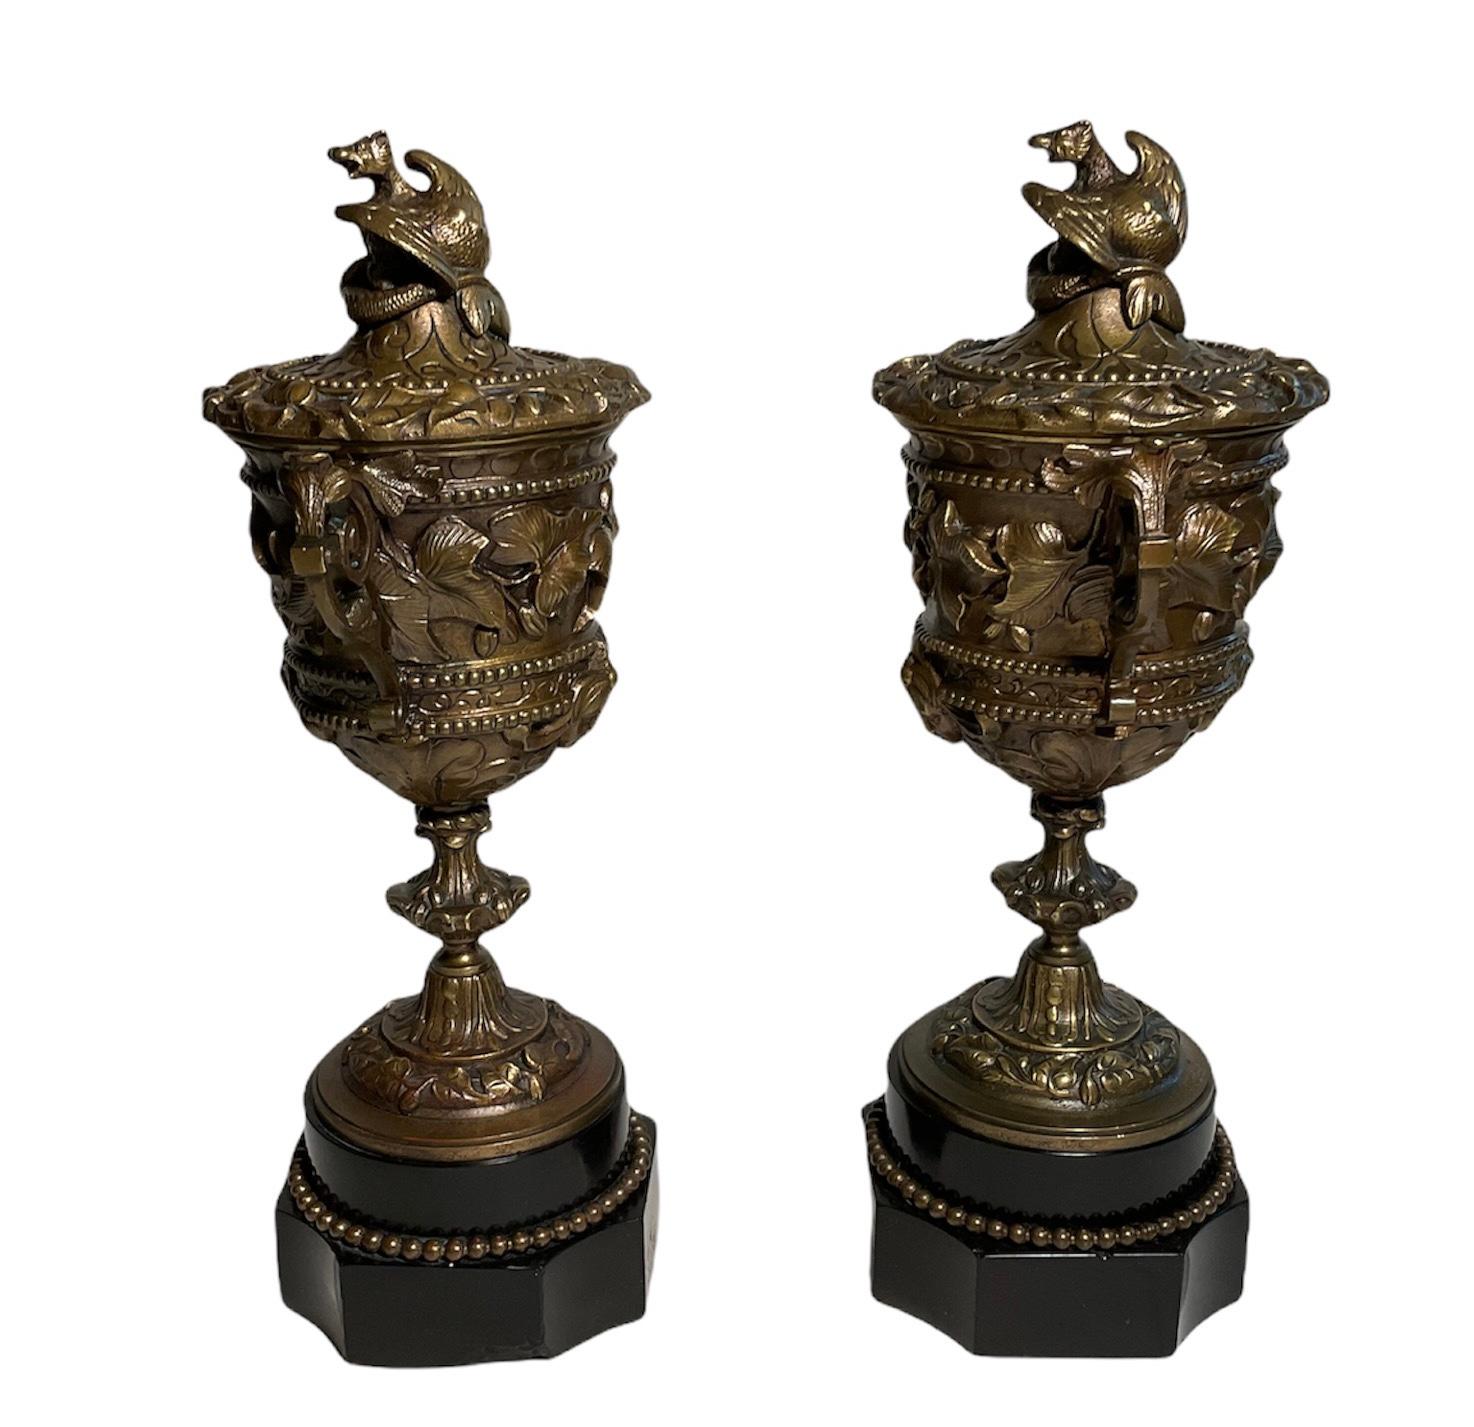 Renaissance 19th Century Pair of French Patinated Bronze Lidded Cups or Urns For Sale